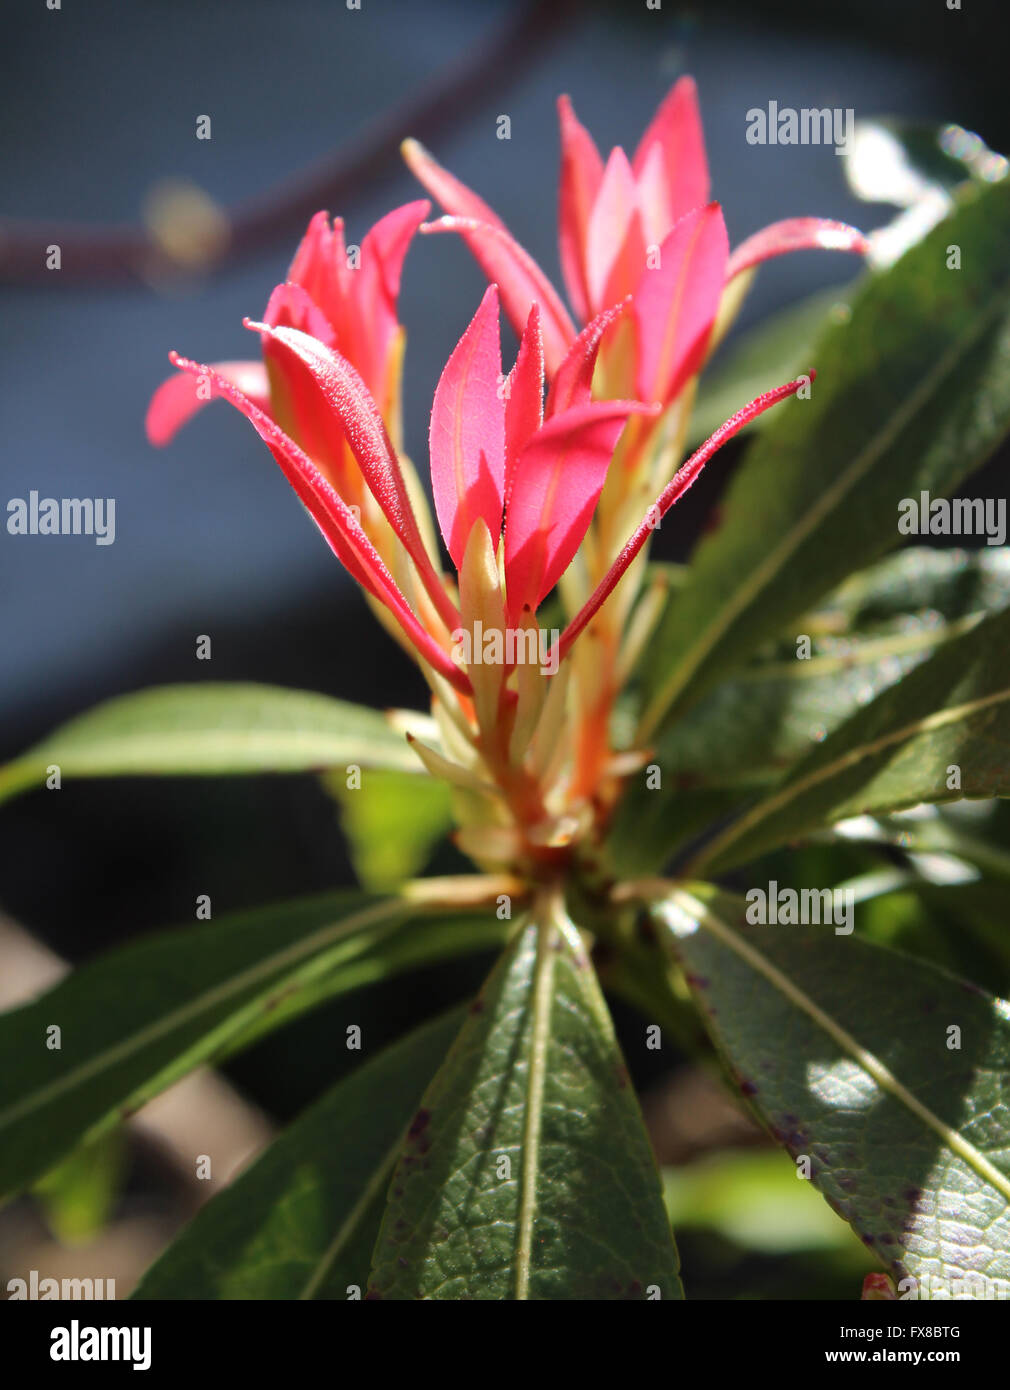 Fresh new spring growth of Pieris japonica, also known as Flame of the Forest or Lilly of the Valley plant. Stock Photo